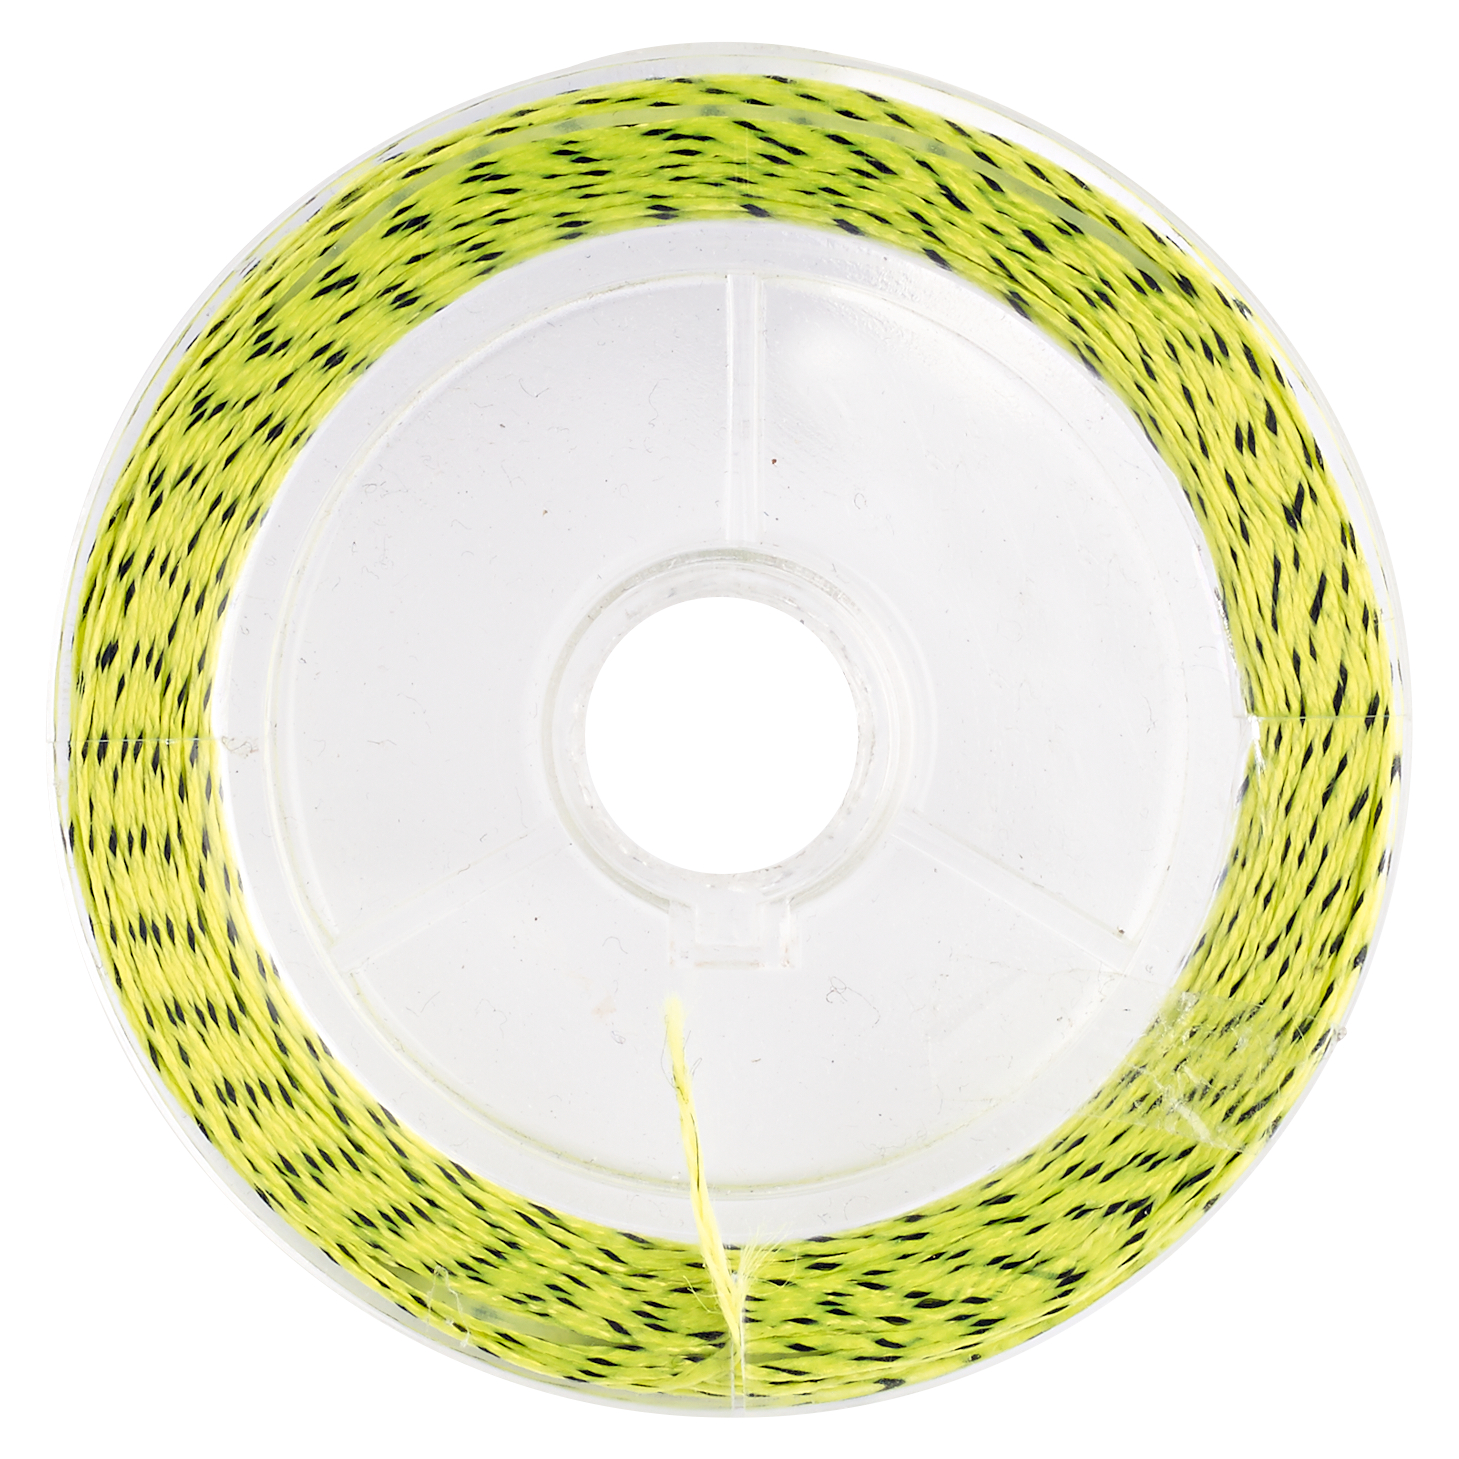 Kogha Fly Fishing Line Backing f. (black/yellow, 90 m) at low prices